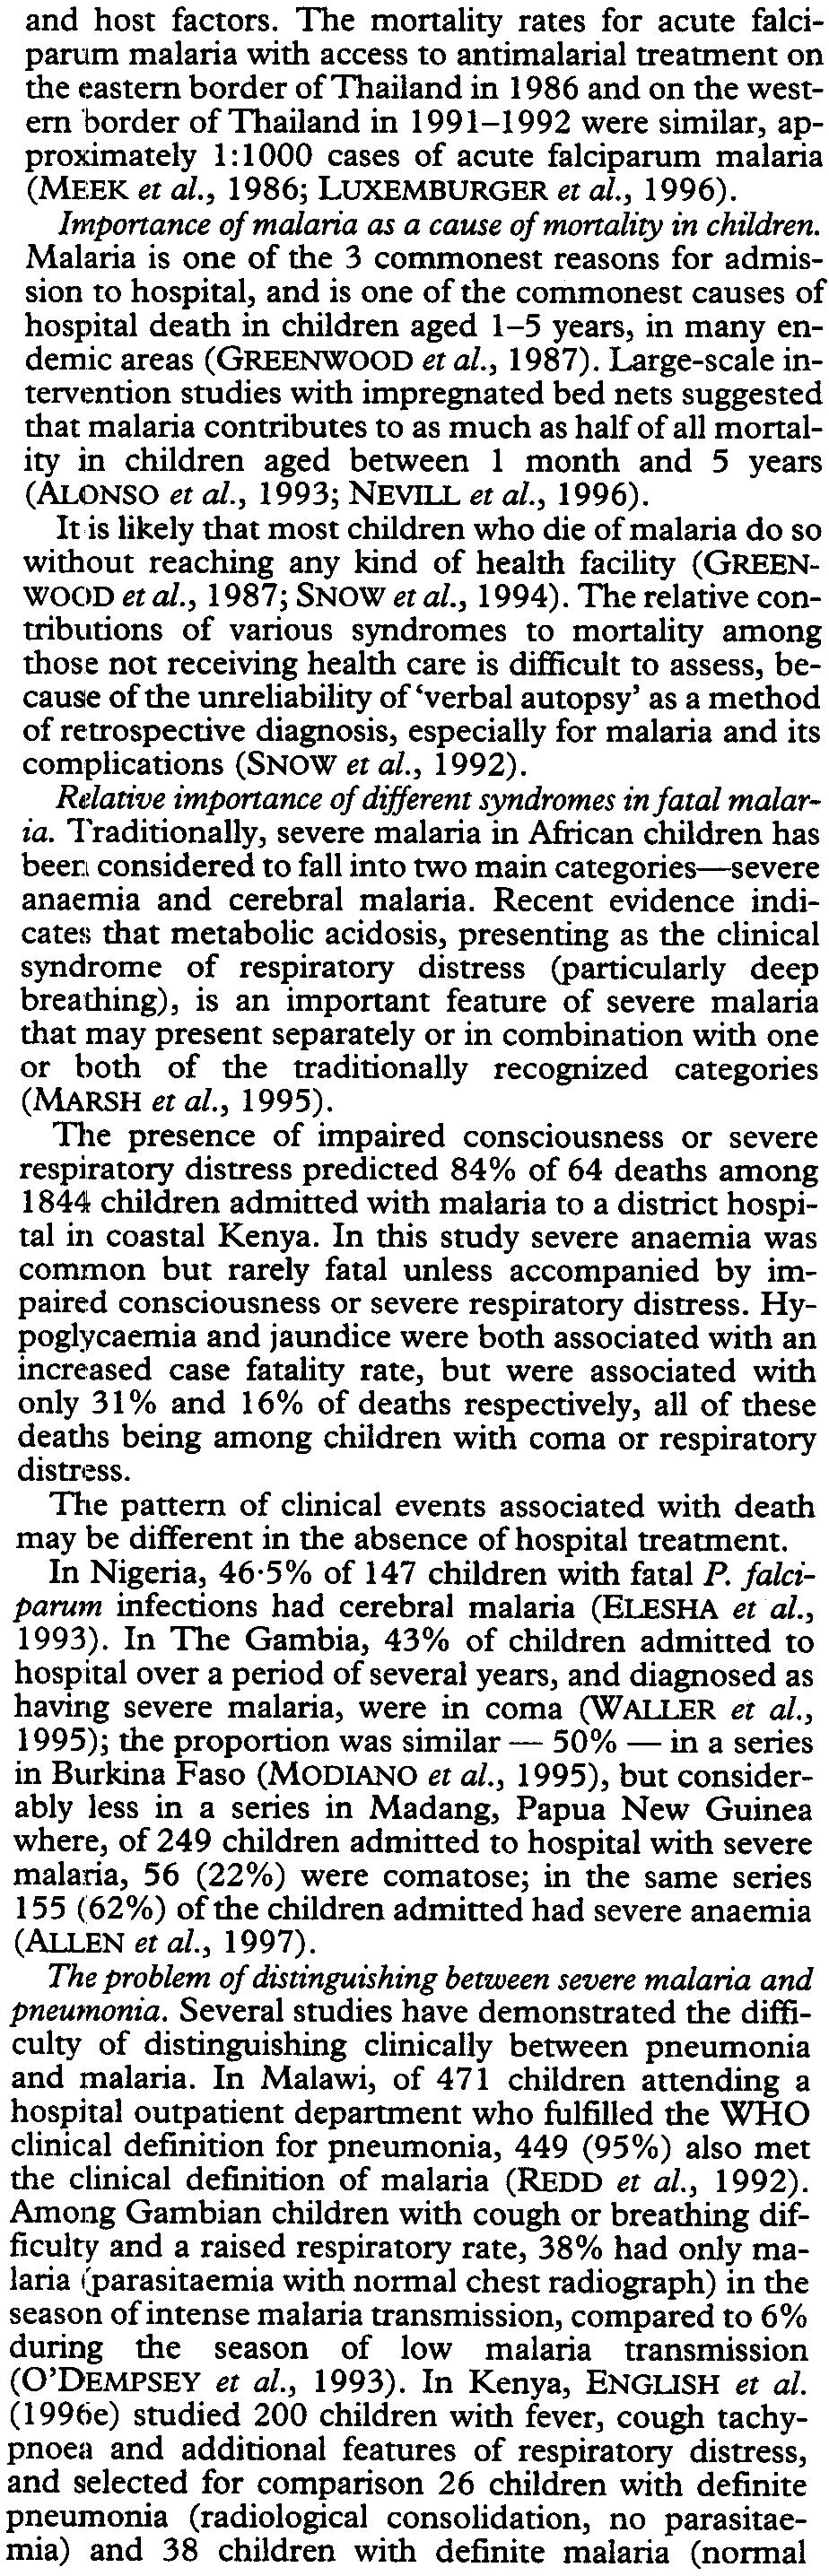 approximately 1 : 1000 cases of acute falciparum malaria (ME:EK et al., 1986; LUXEMBURGER et al., 1996). Importance of malaria as a cause of mortality in children.